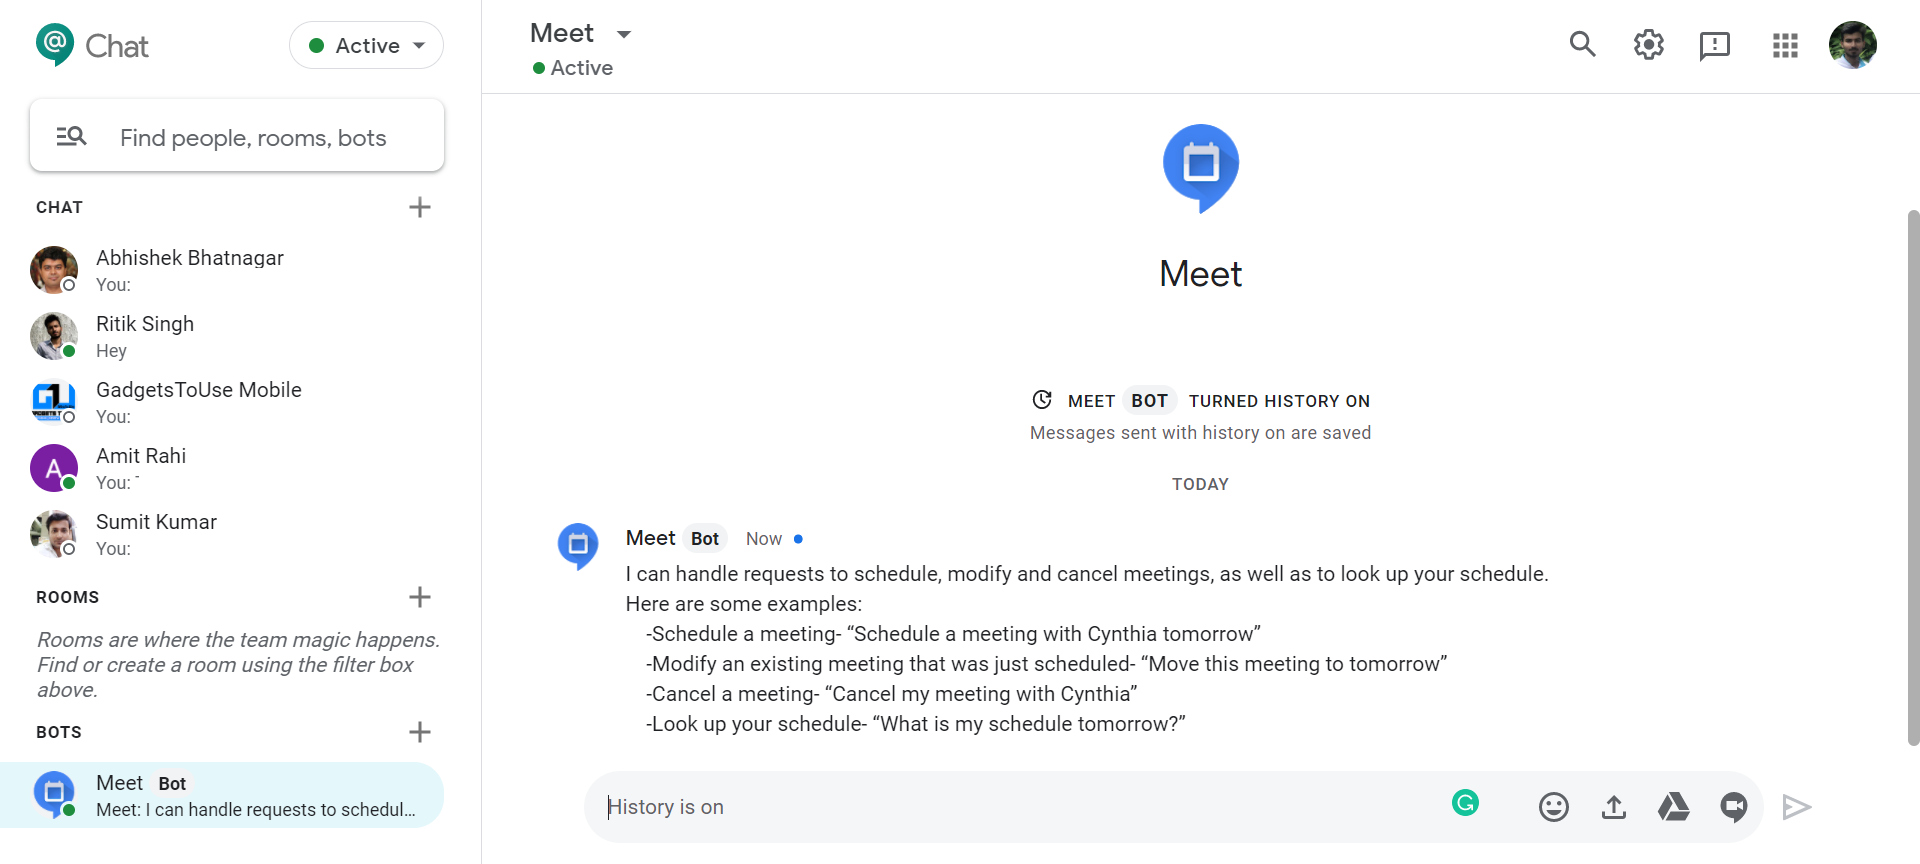 How to Add and Use Bots in Google Chat – Gadgets To Use